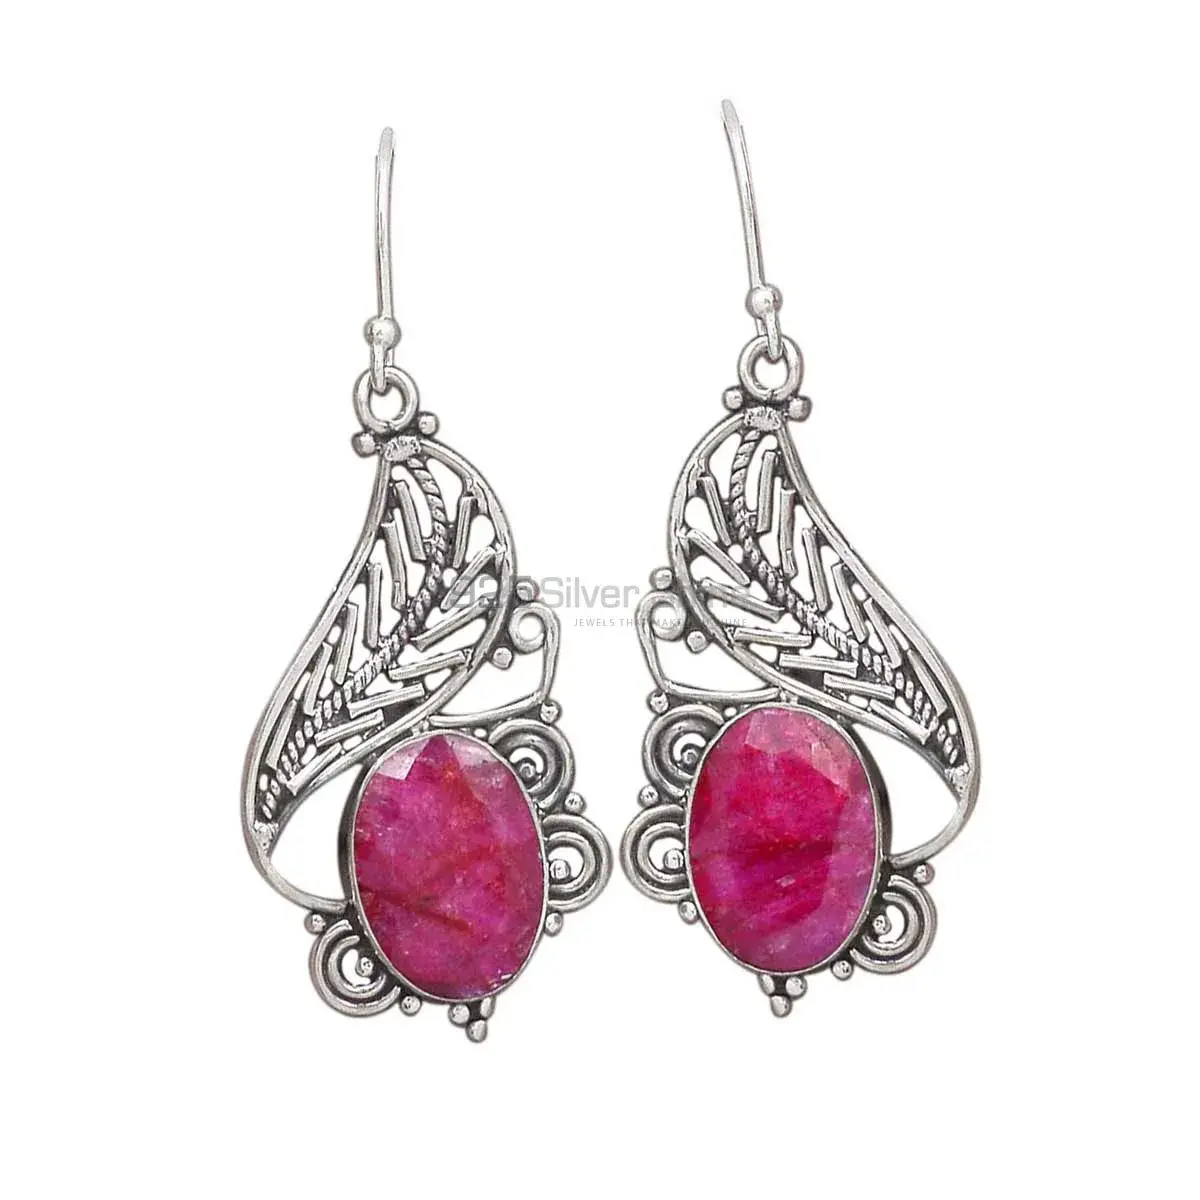 Inexpensive 925 Sterling Silver Earrings In Dyed Ruby Gemstone Jewelry 925SE2941